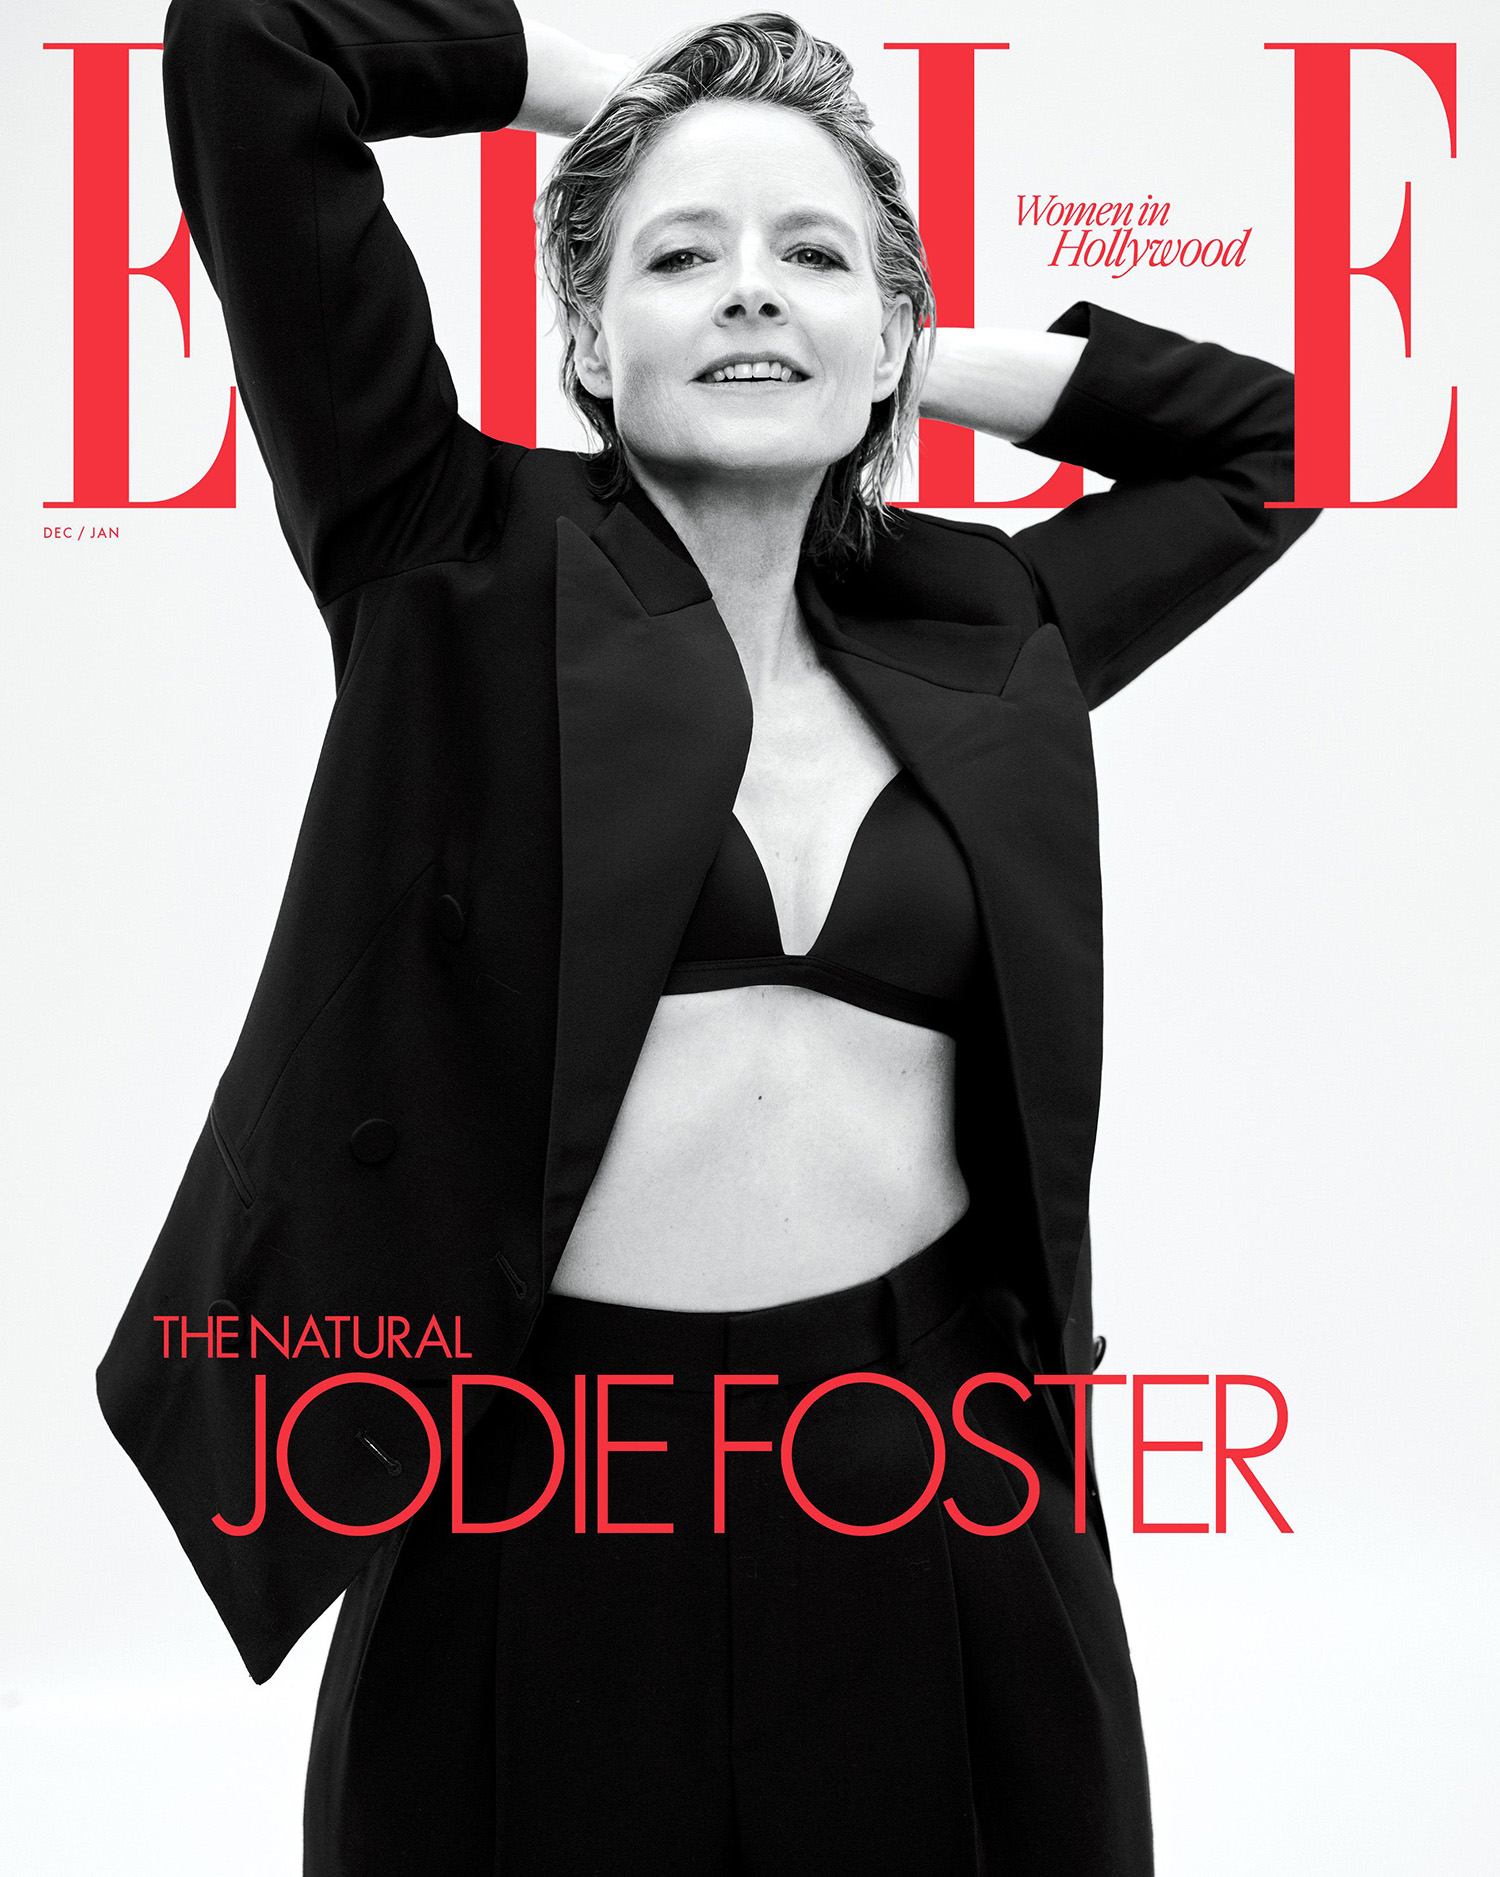 Jodie Foster covers Elle US December 2023-January 2024 by Zoey Grossman